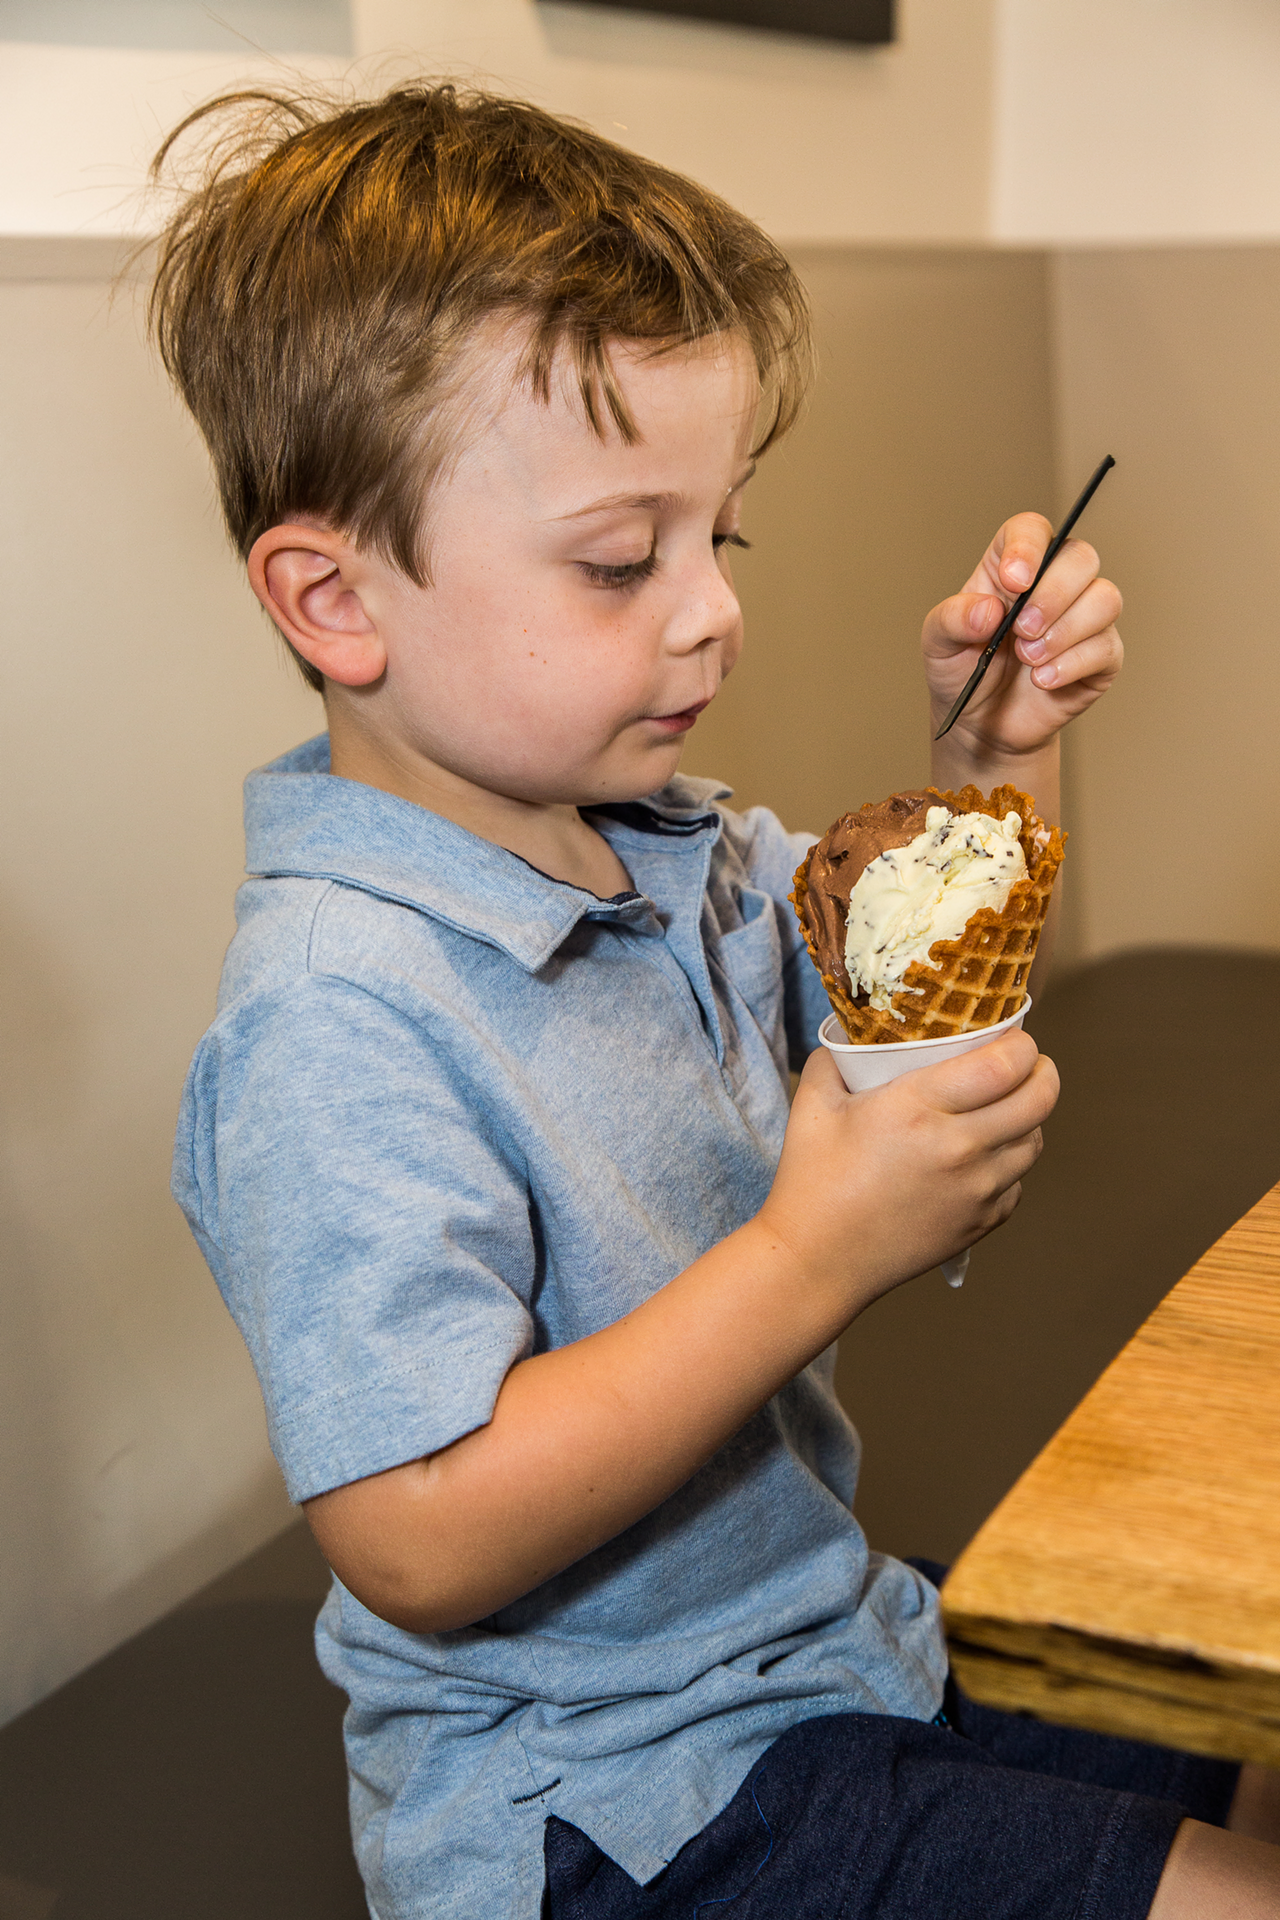 Waffle cones are made from scratch in-house